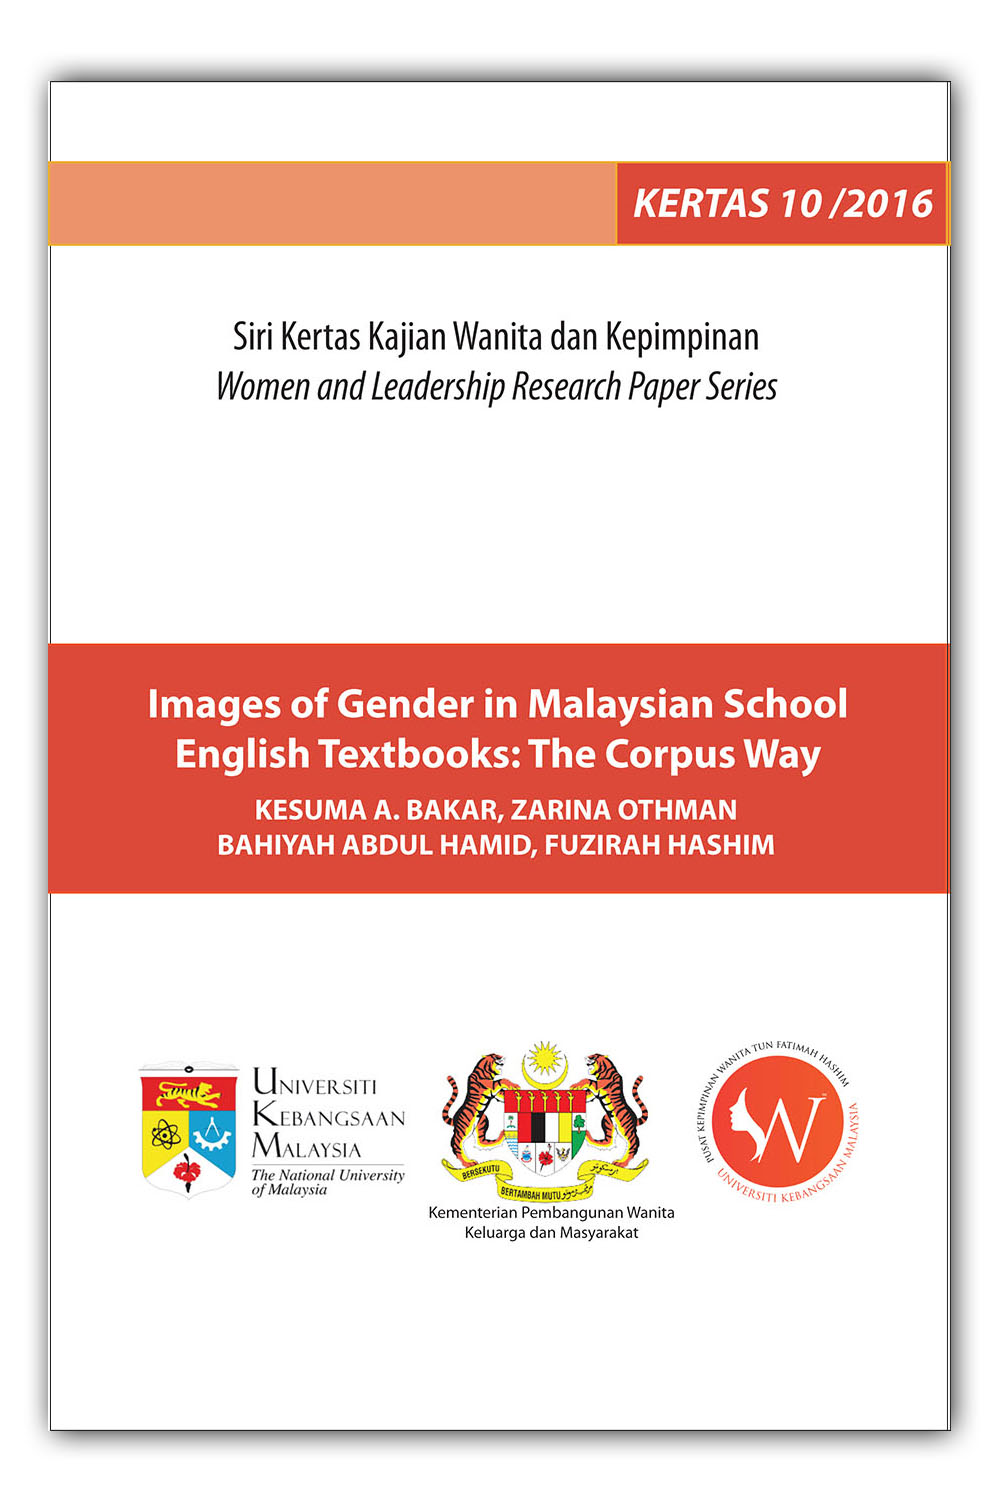 Images of Gender in Malaysian School English Textbooks: The Corpus Way